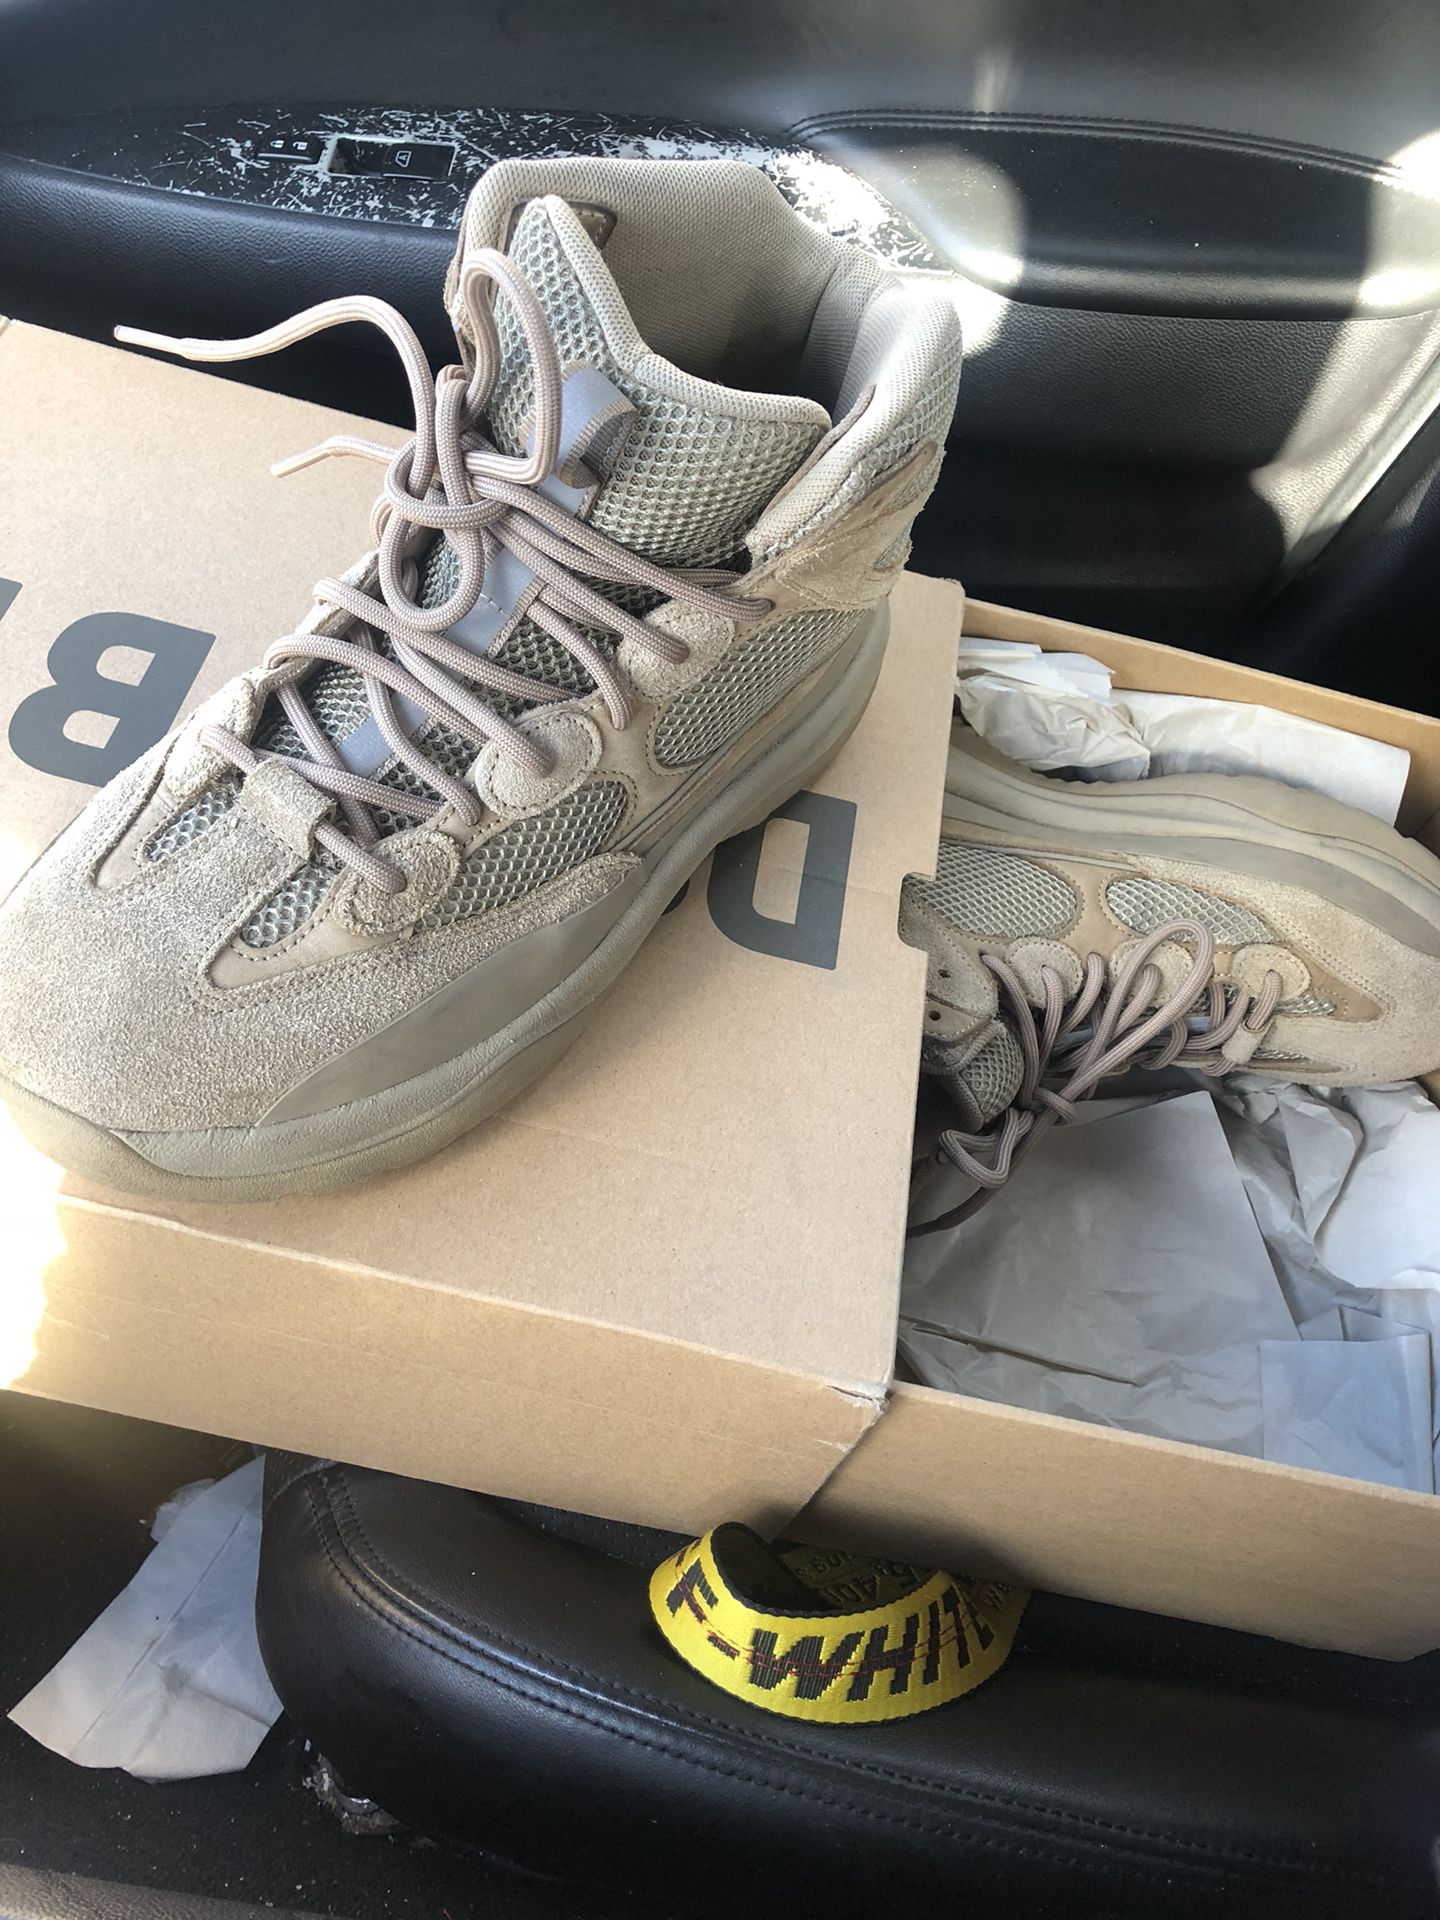 Yeezy boots size 10 1/2 $175